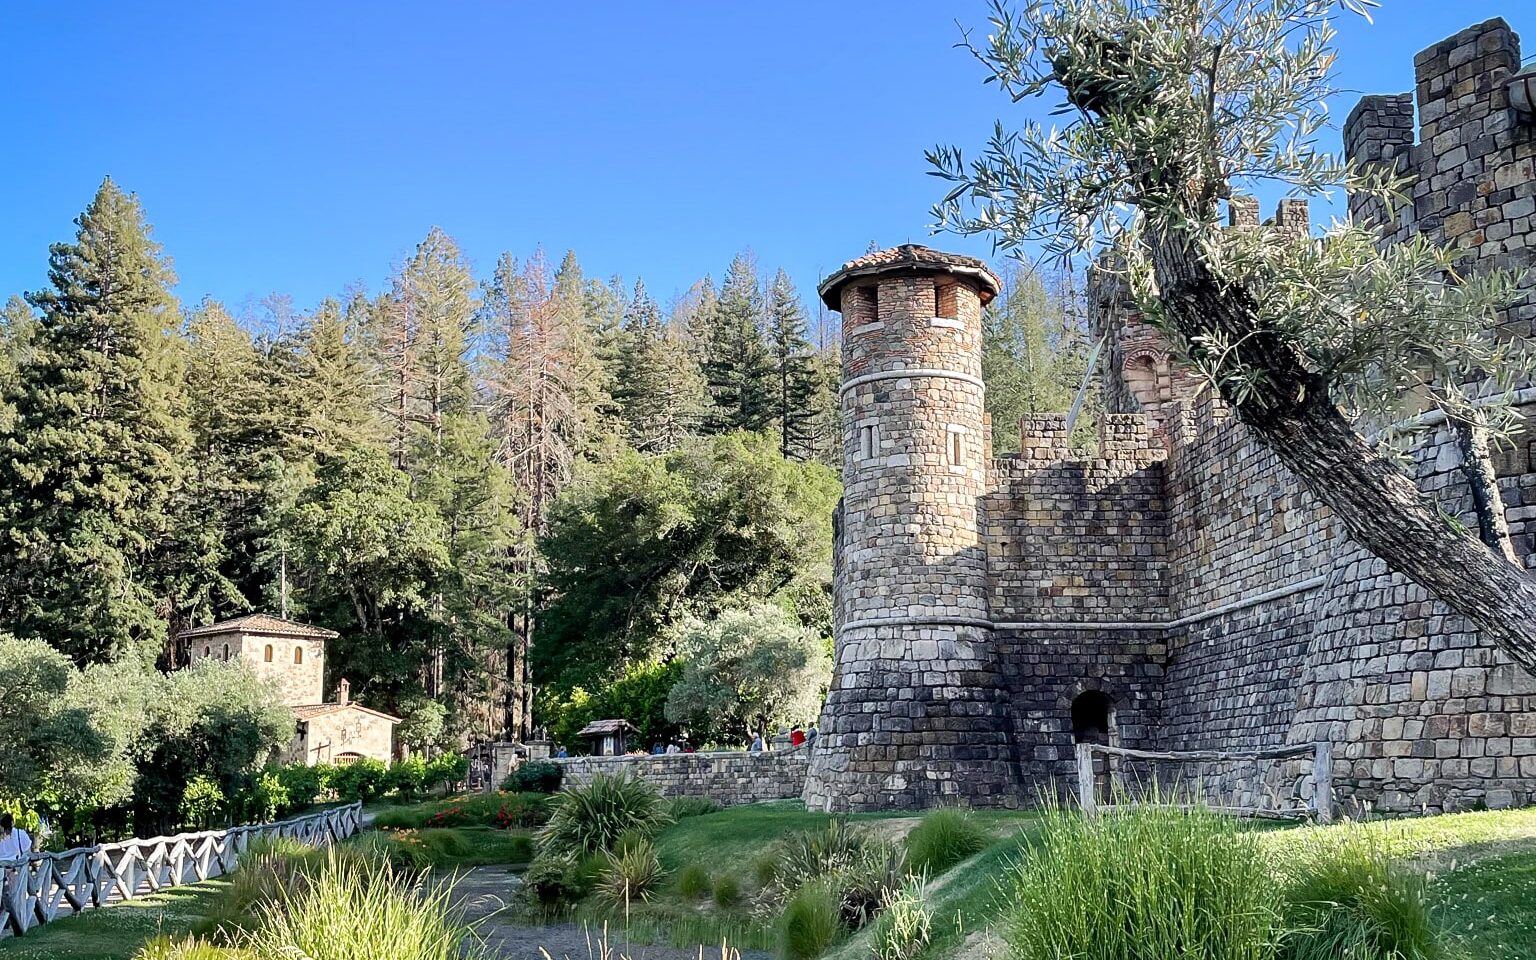 Castle winery in Napa Valley